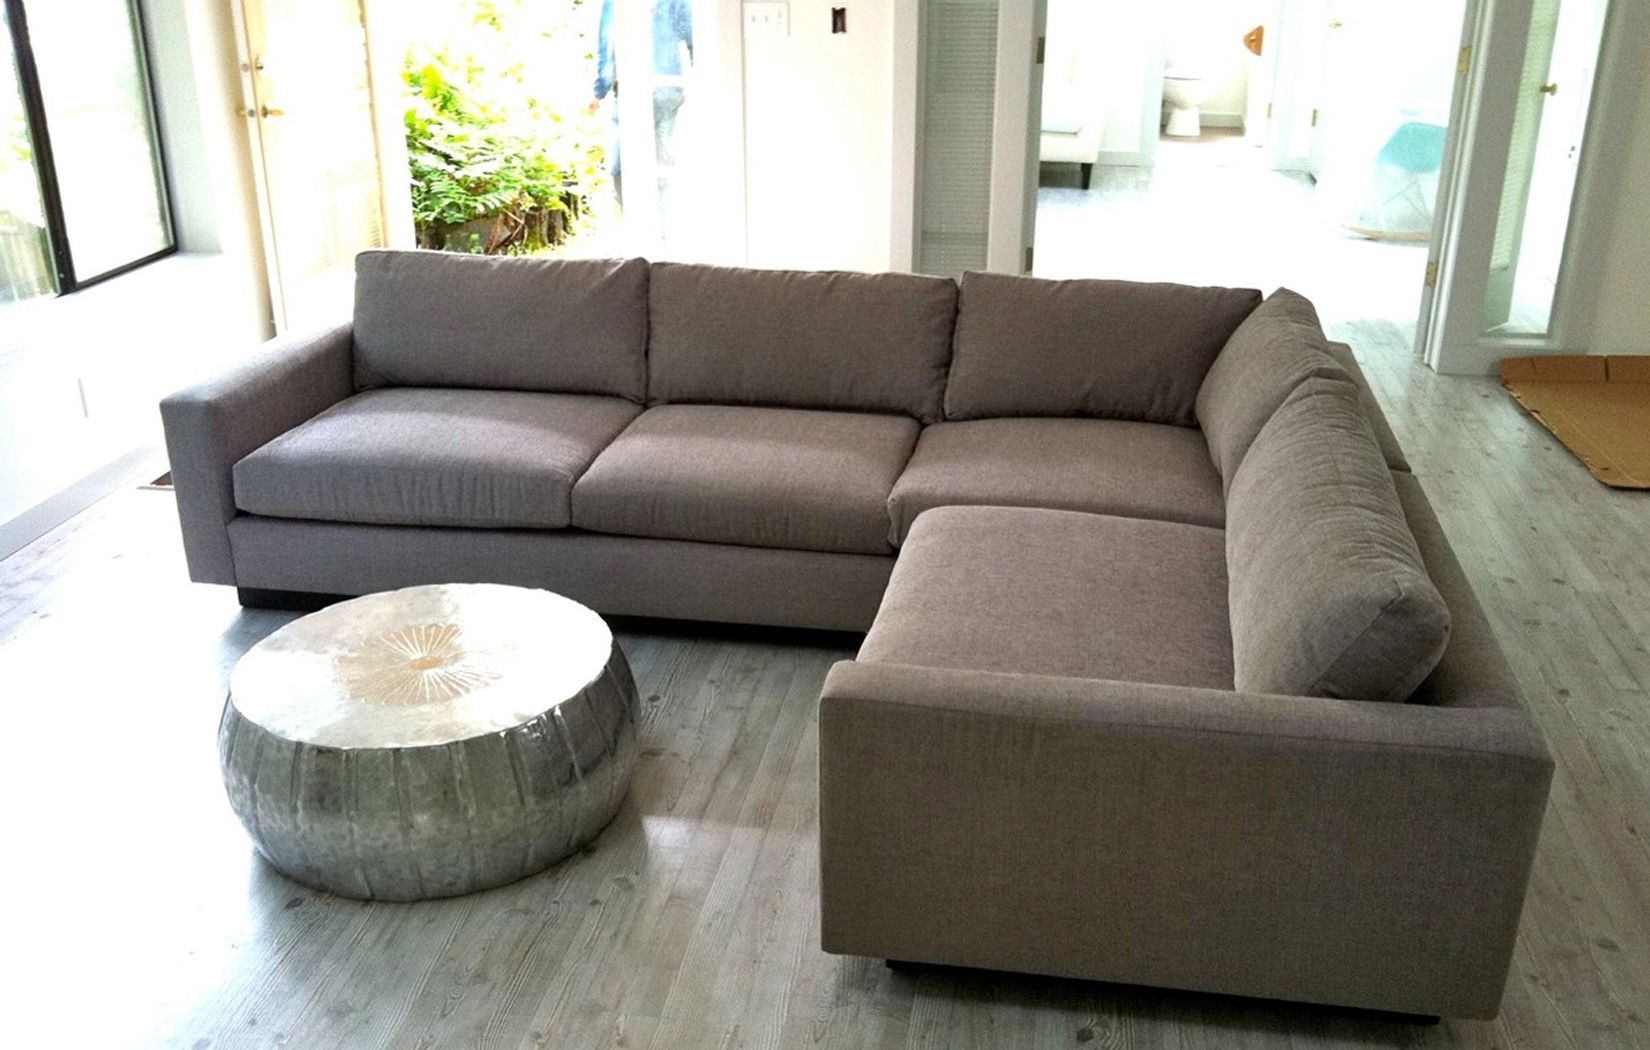 2019 Sectional Sofas Seattle (View 1 of 20)